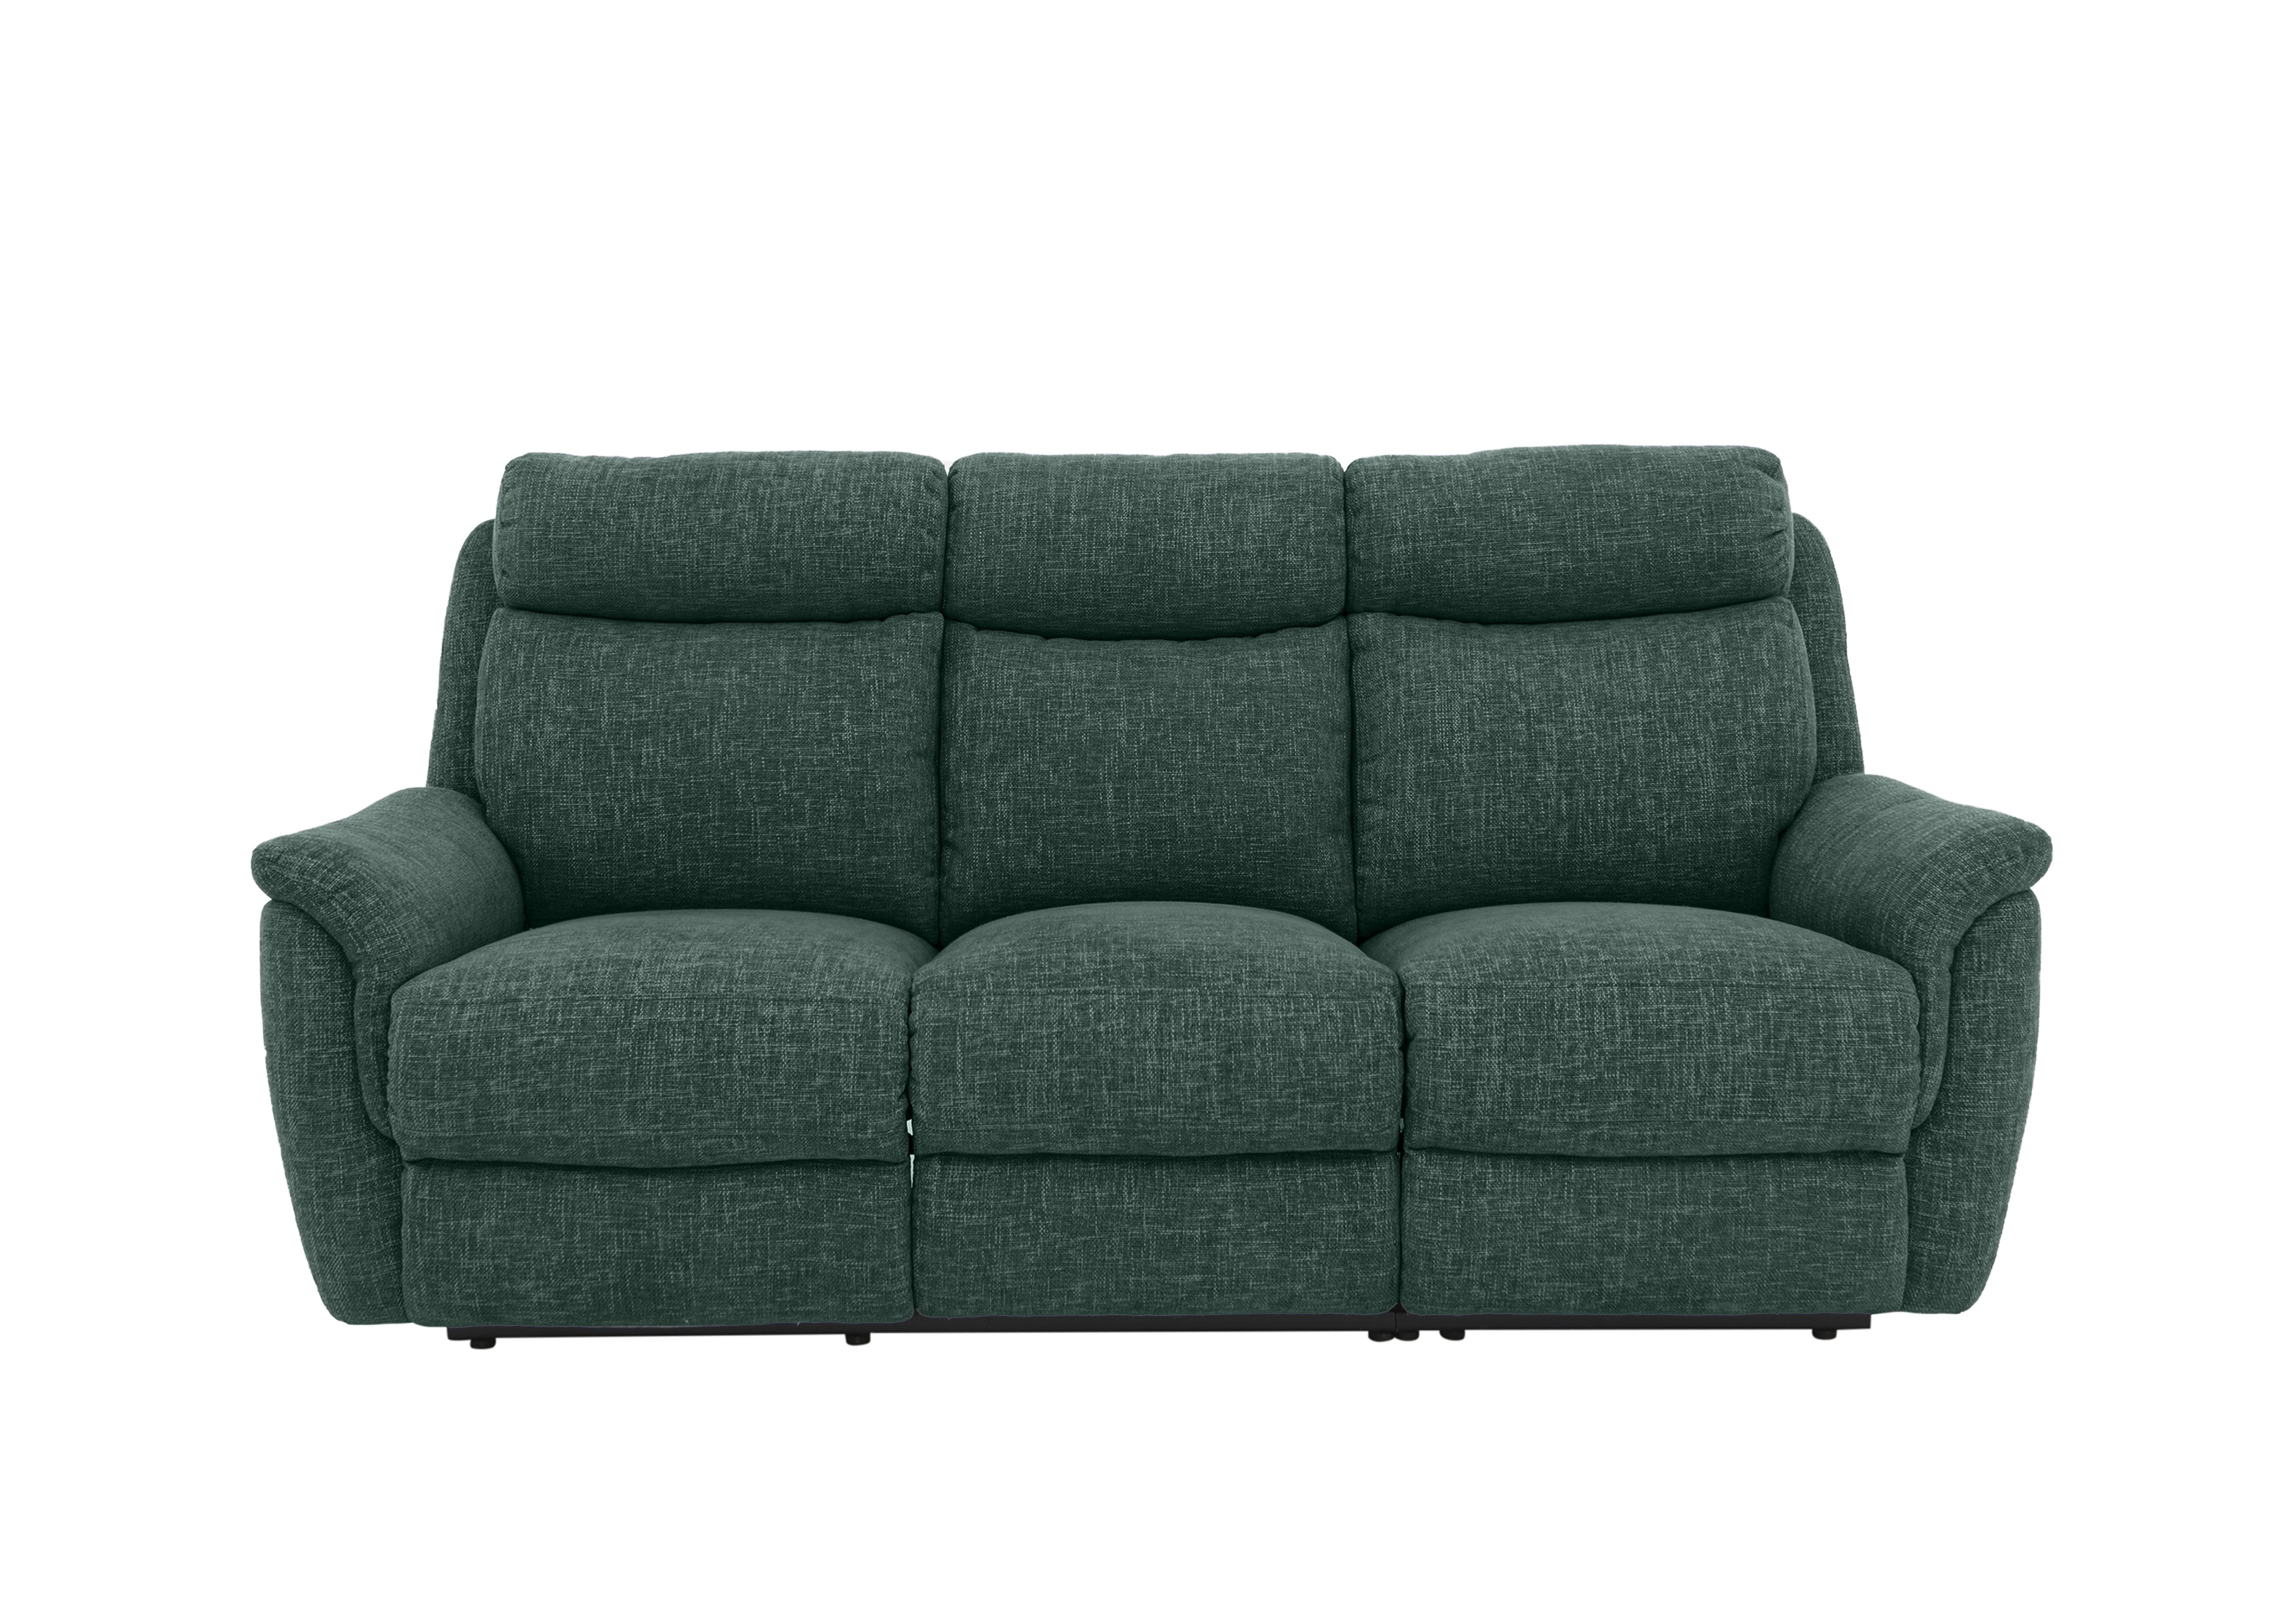 Orlando 3 Seater Fabric Power Recliner Sofa with Power Headrests in Anivia Green 19445 on Furniture Village